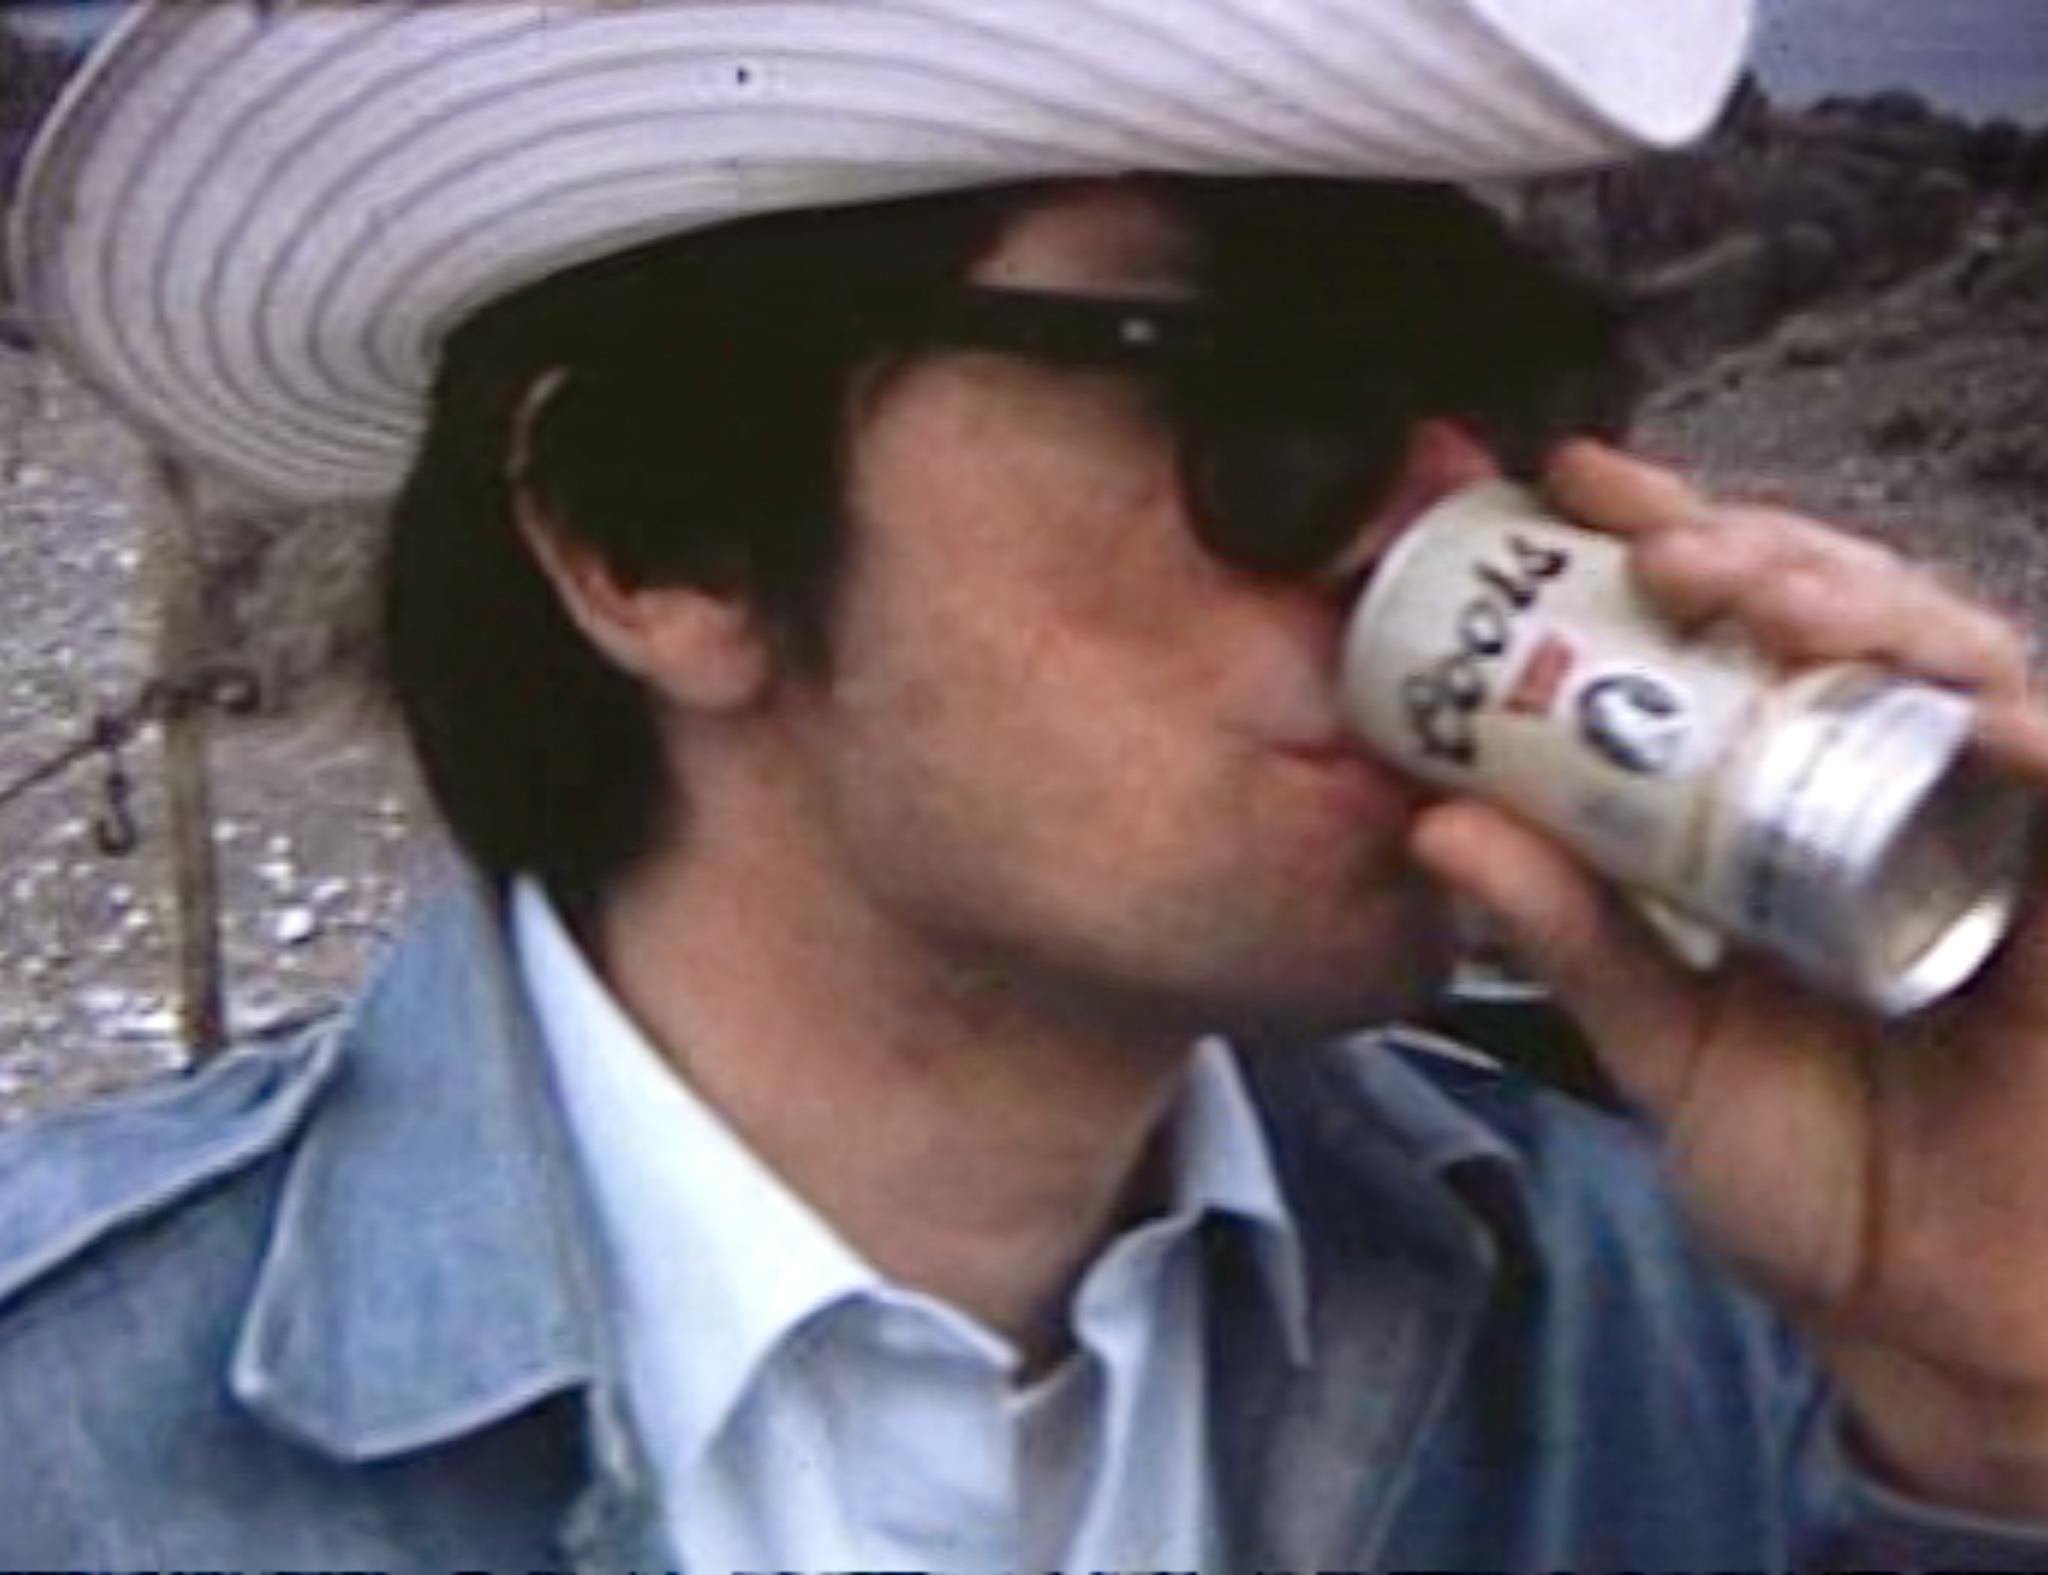 A man wearing a cowboy hat drinking a Coors beer